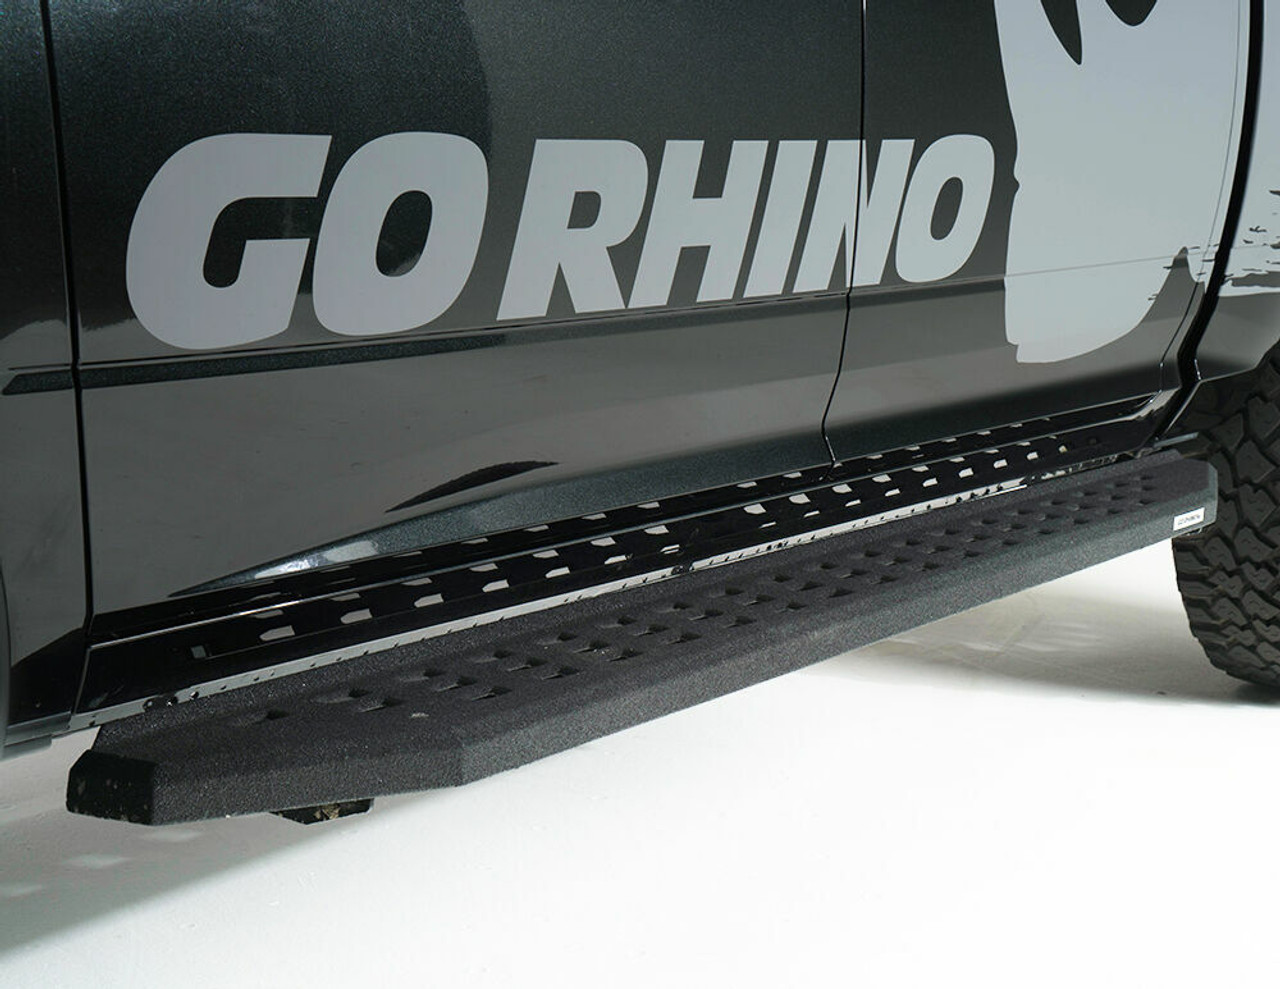 Go Rhino 69415587T Ford, F-150, 2015 - 2021, RB20 Running boards - Complete Kit: RB20 Running boards + Brackets, Galvanized Steel, Protective Bedliner coating, 69400087T RB20 + 6941555 RB Brackets